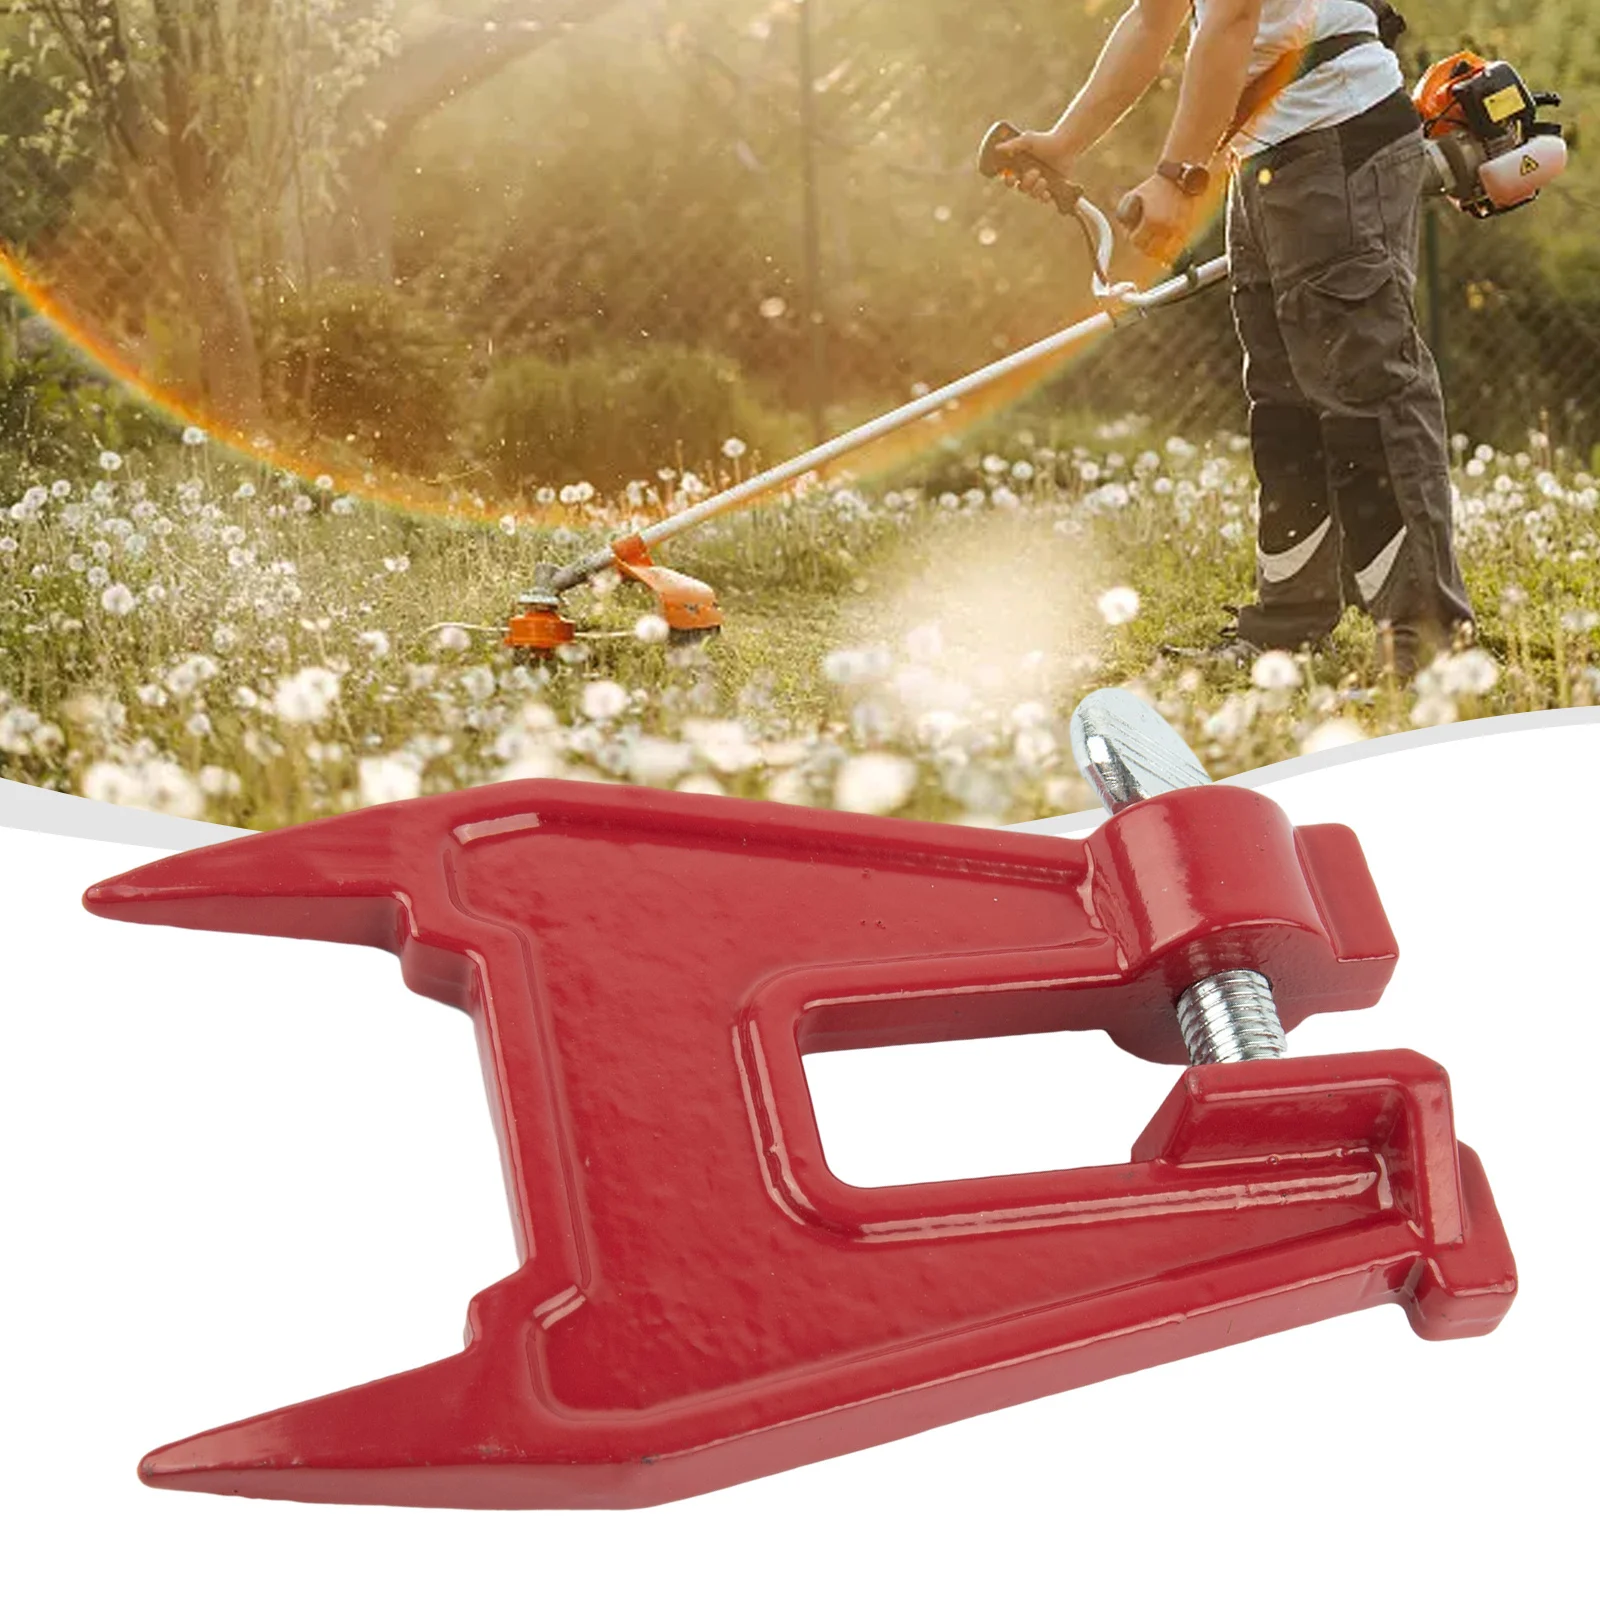 

Saws Sword Holder Saw Blade Sharpener 1pcs Robust Sharpening Tools Stable For Fixing The Chainsaw Sword Durable